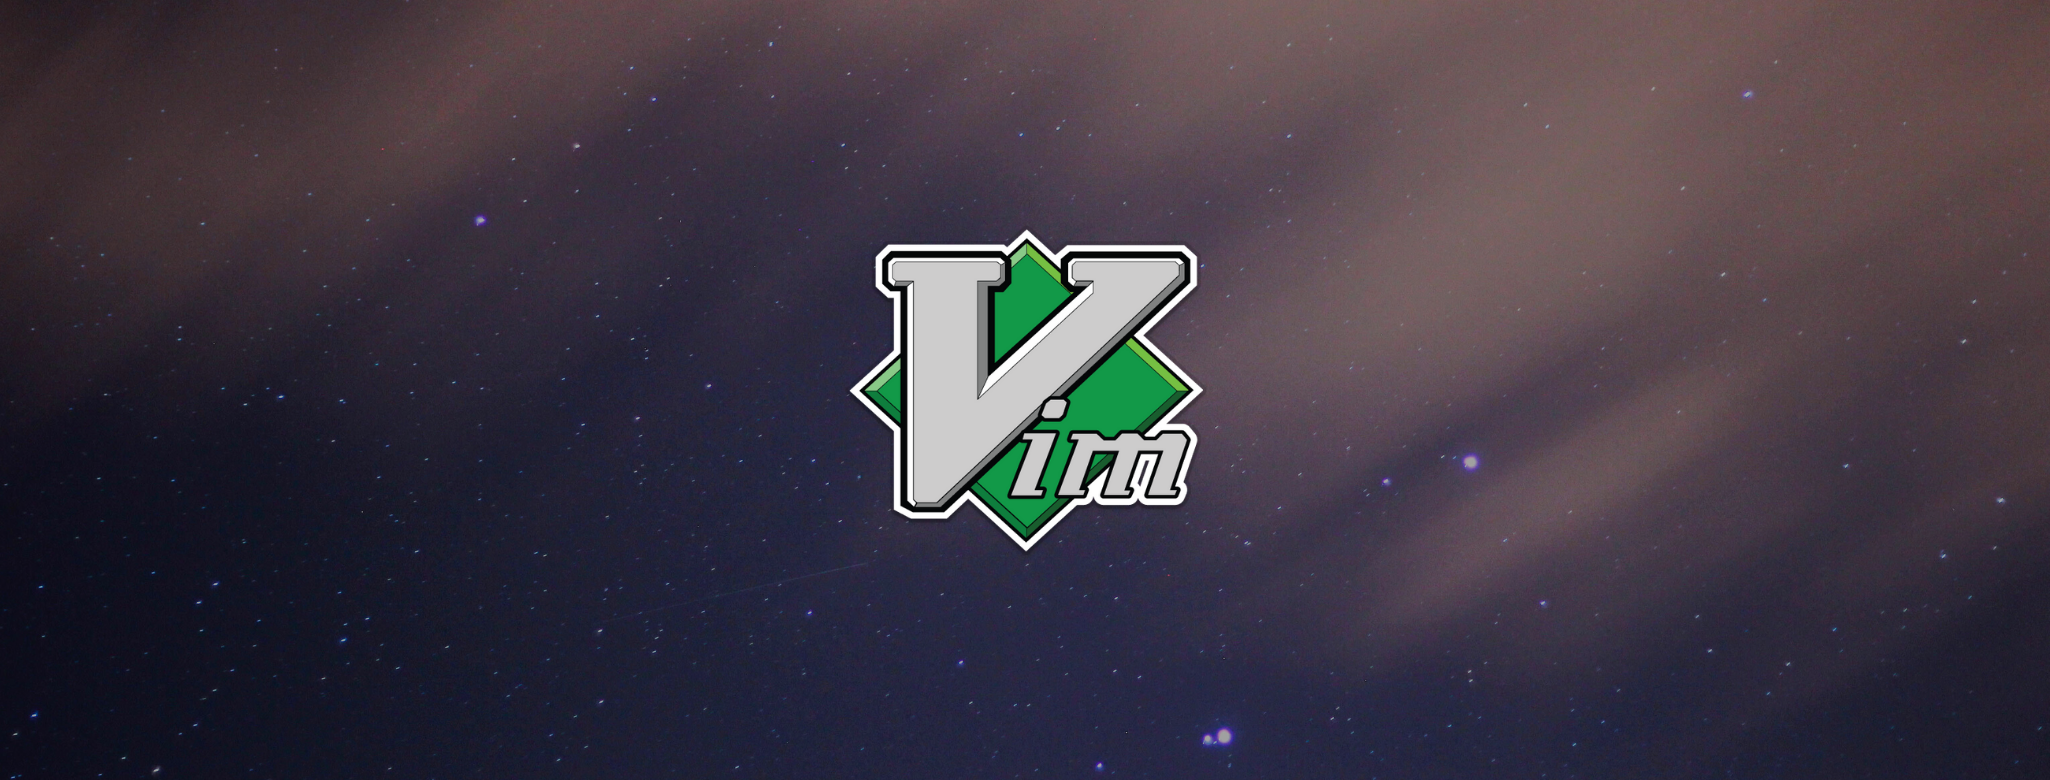 A step by step approach to vim